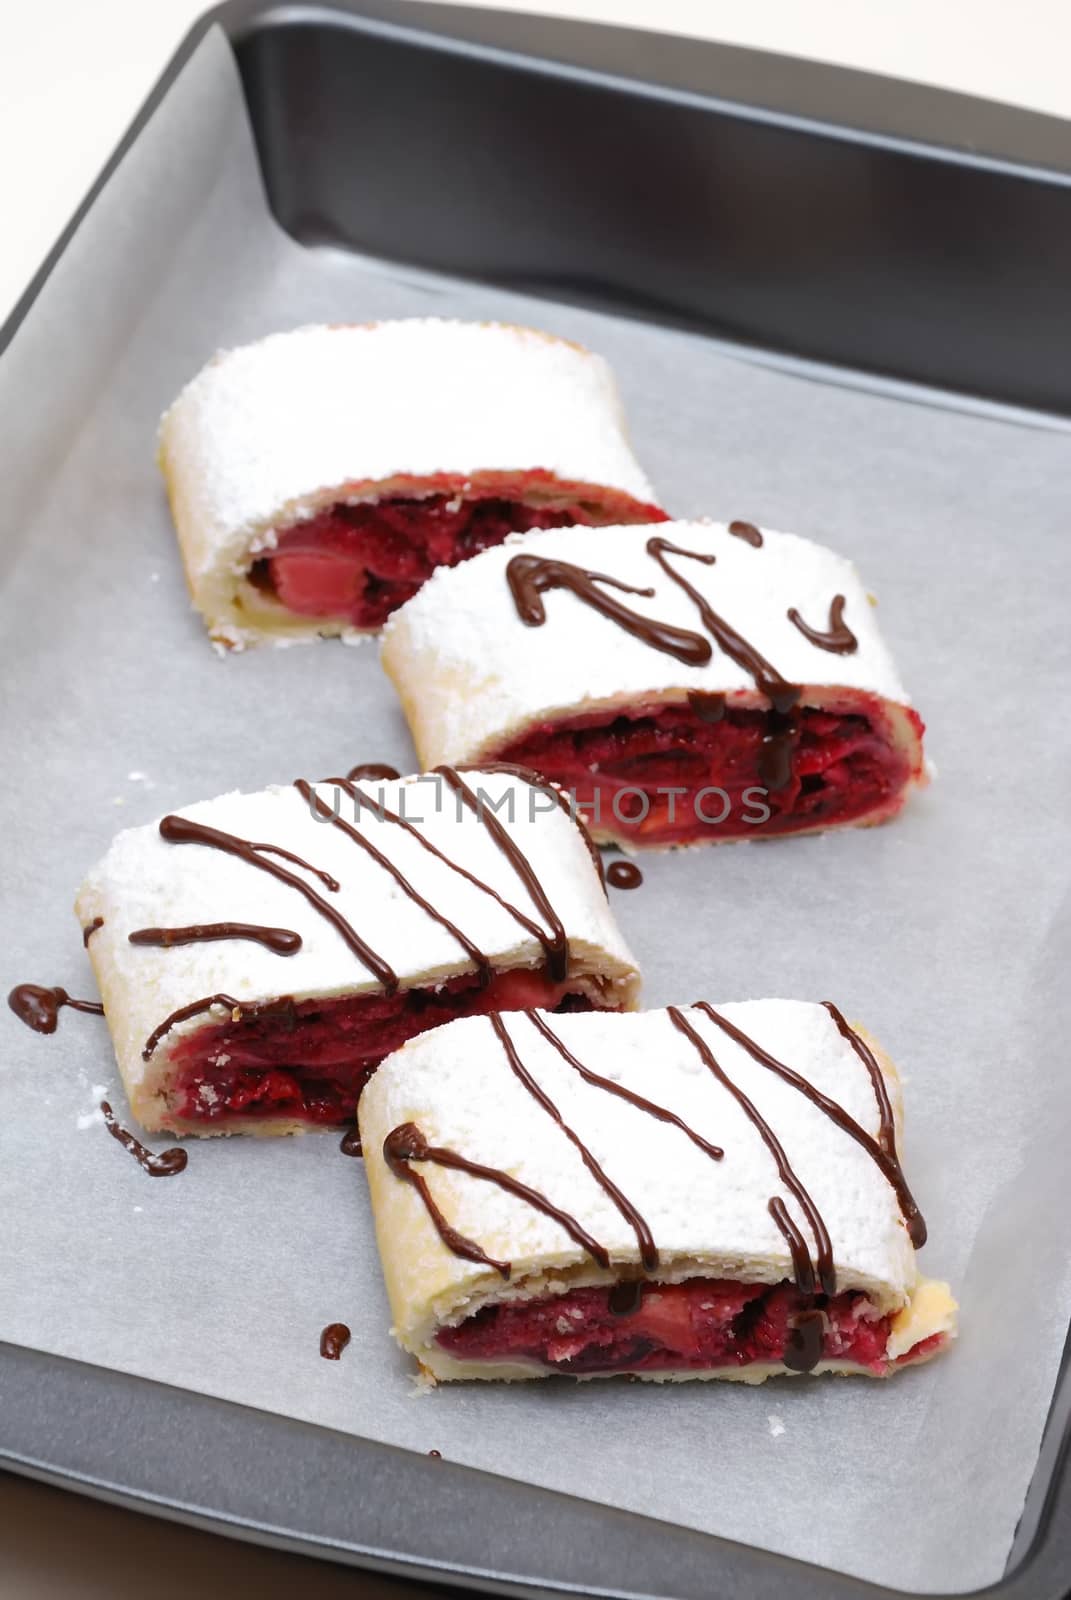 Swiss rolls with cherry and strawberry decorated decorated with chocolate on parchment